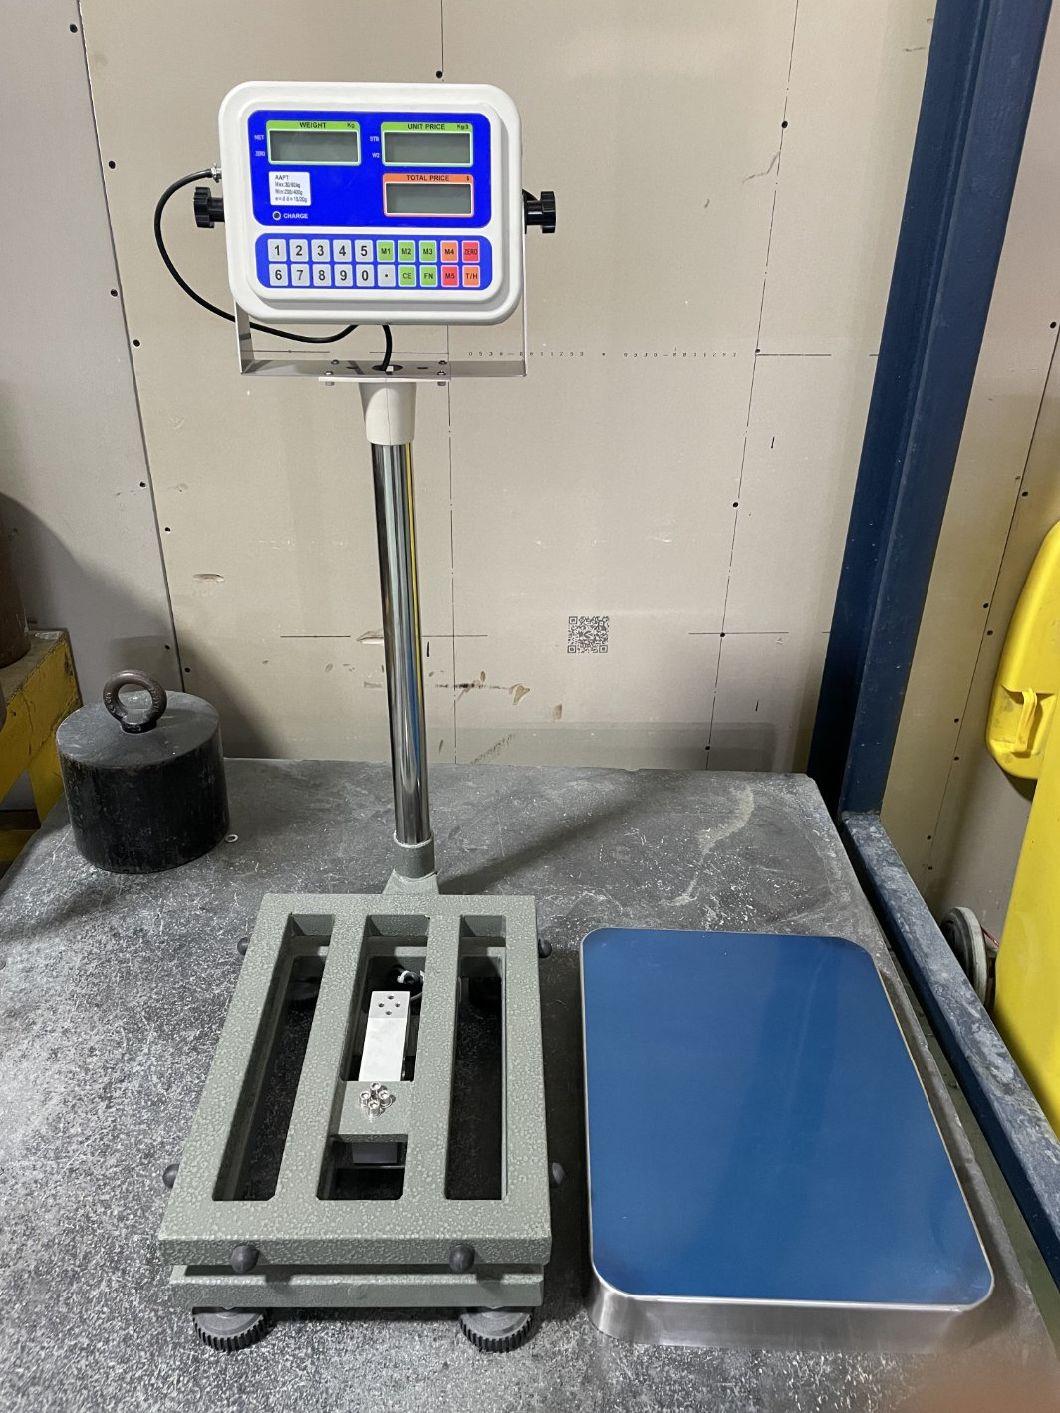 Digital Platform Scale with Pricing Scale LCD Display